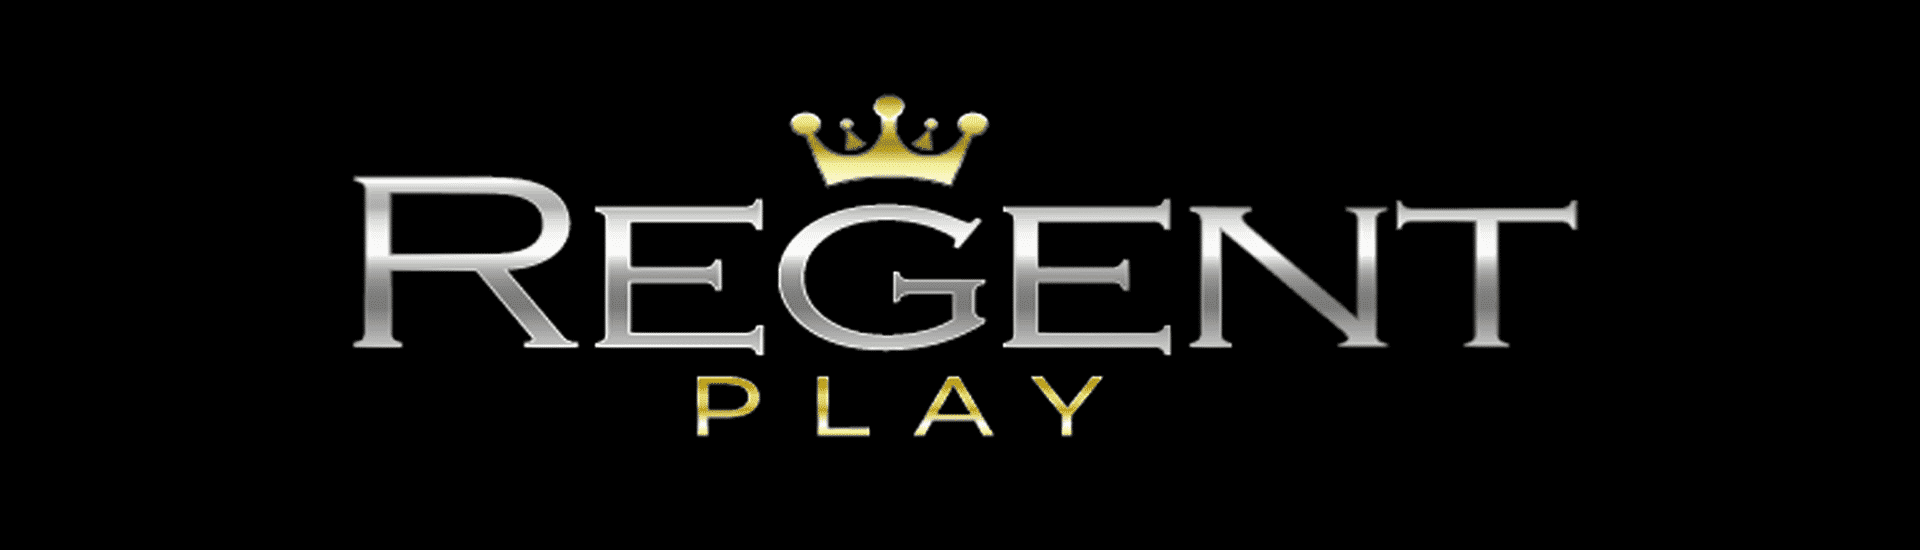 Regent Play Featured Image